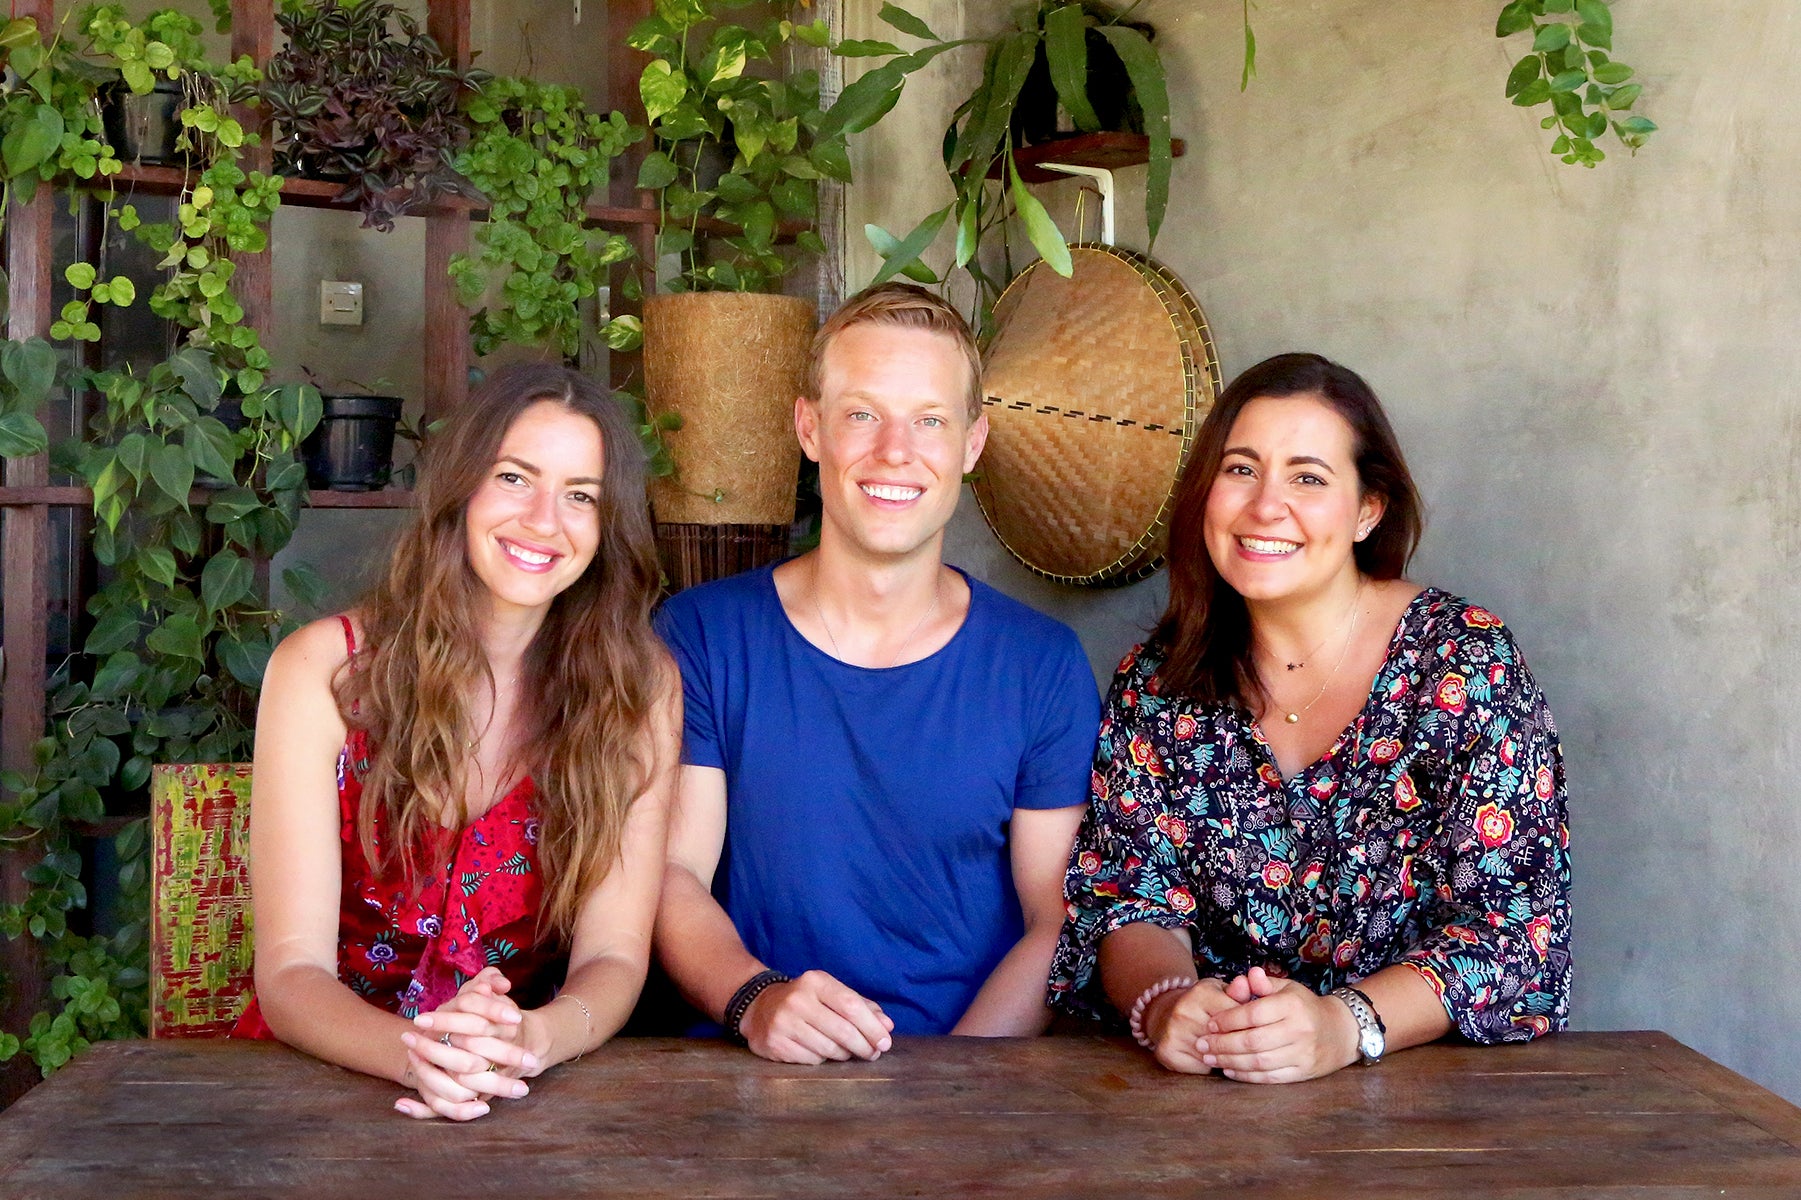 The TAMGA Designs team: founders Yana Dales and Eric Dales and head designer Anna Valero Domenech. 